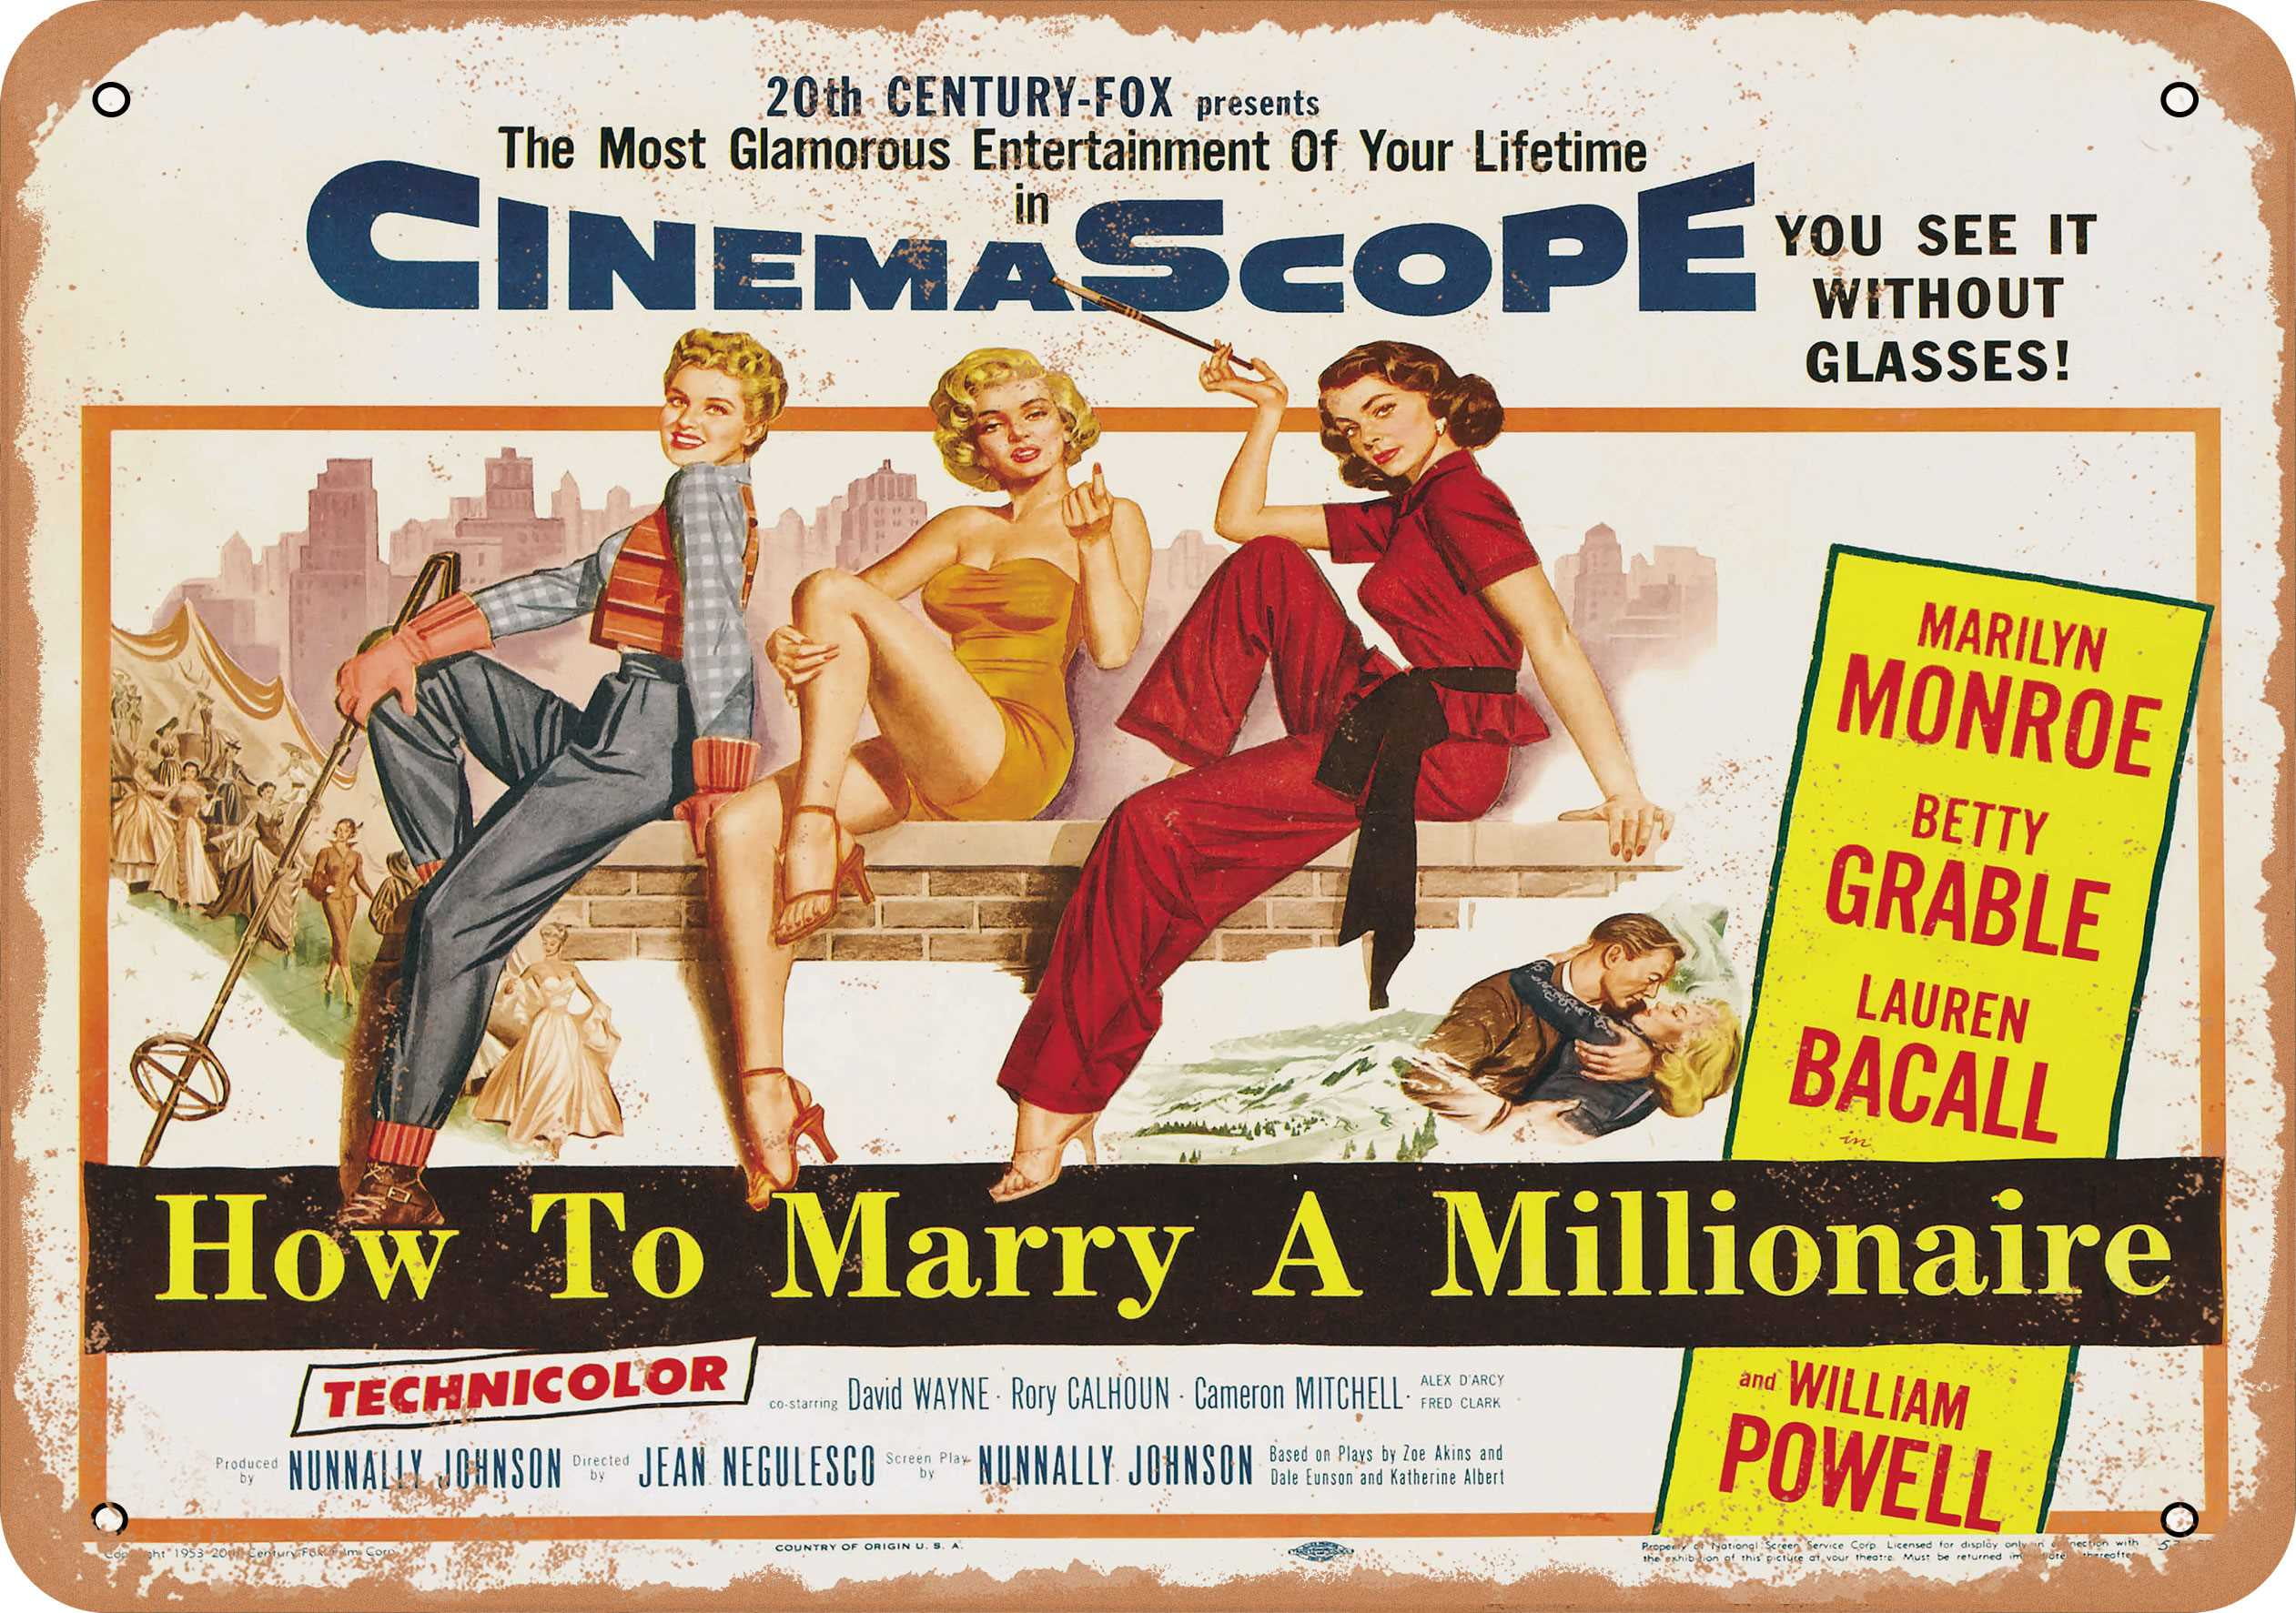 QUALITY VINTAGE STYLE METAL WALL PLAQUE MOVIE SIGN *HOW TO MARRY A MILLIONAIRE* 